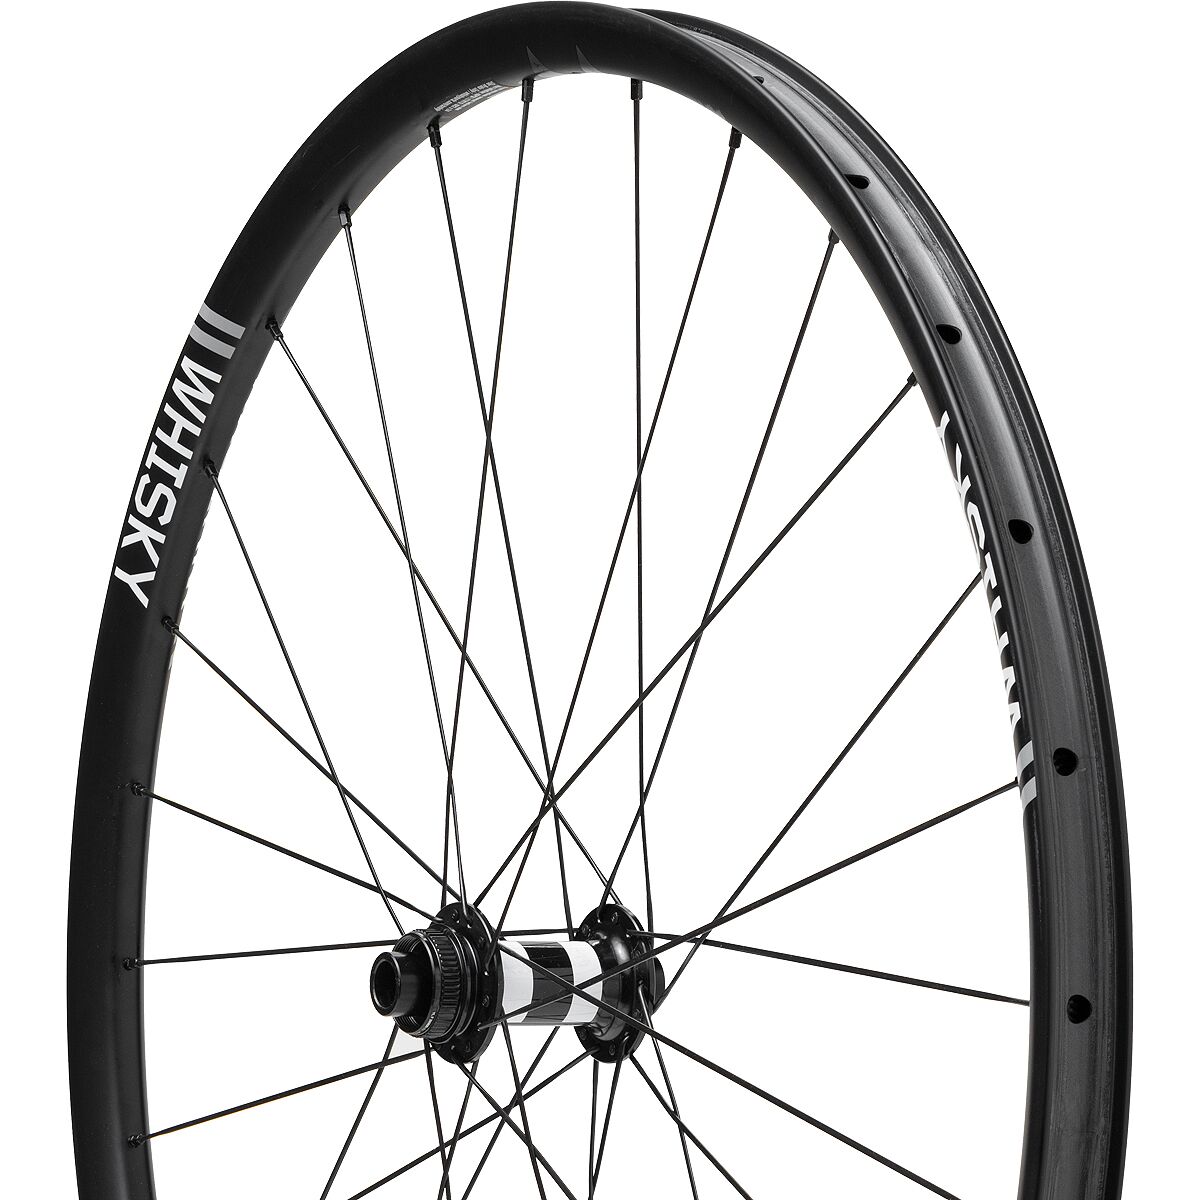 Whisky Parts Co. No.9 30w Carbon Road Wheel - Tubeless